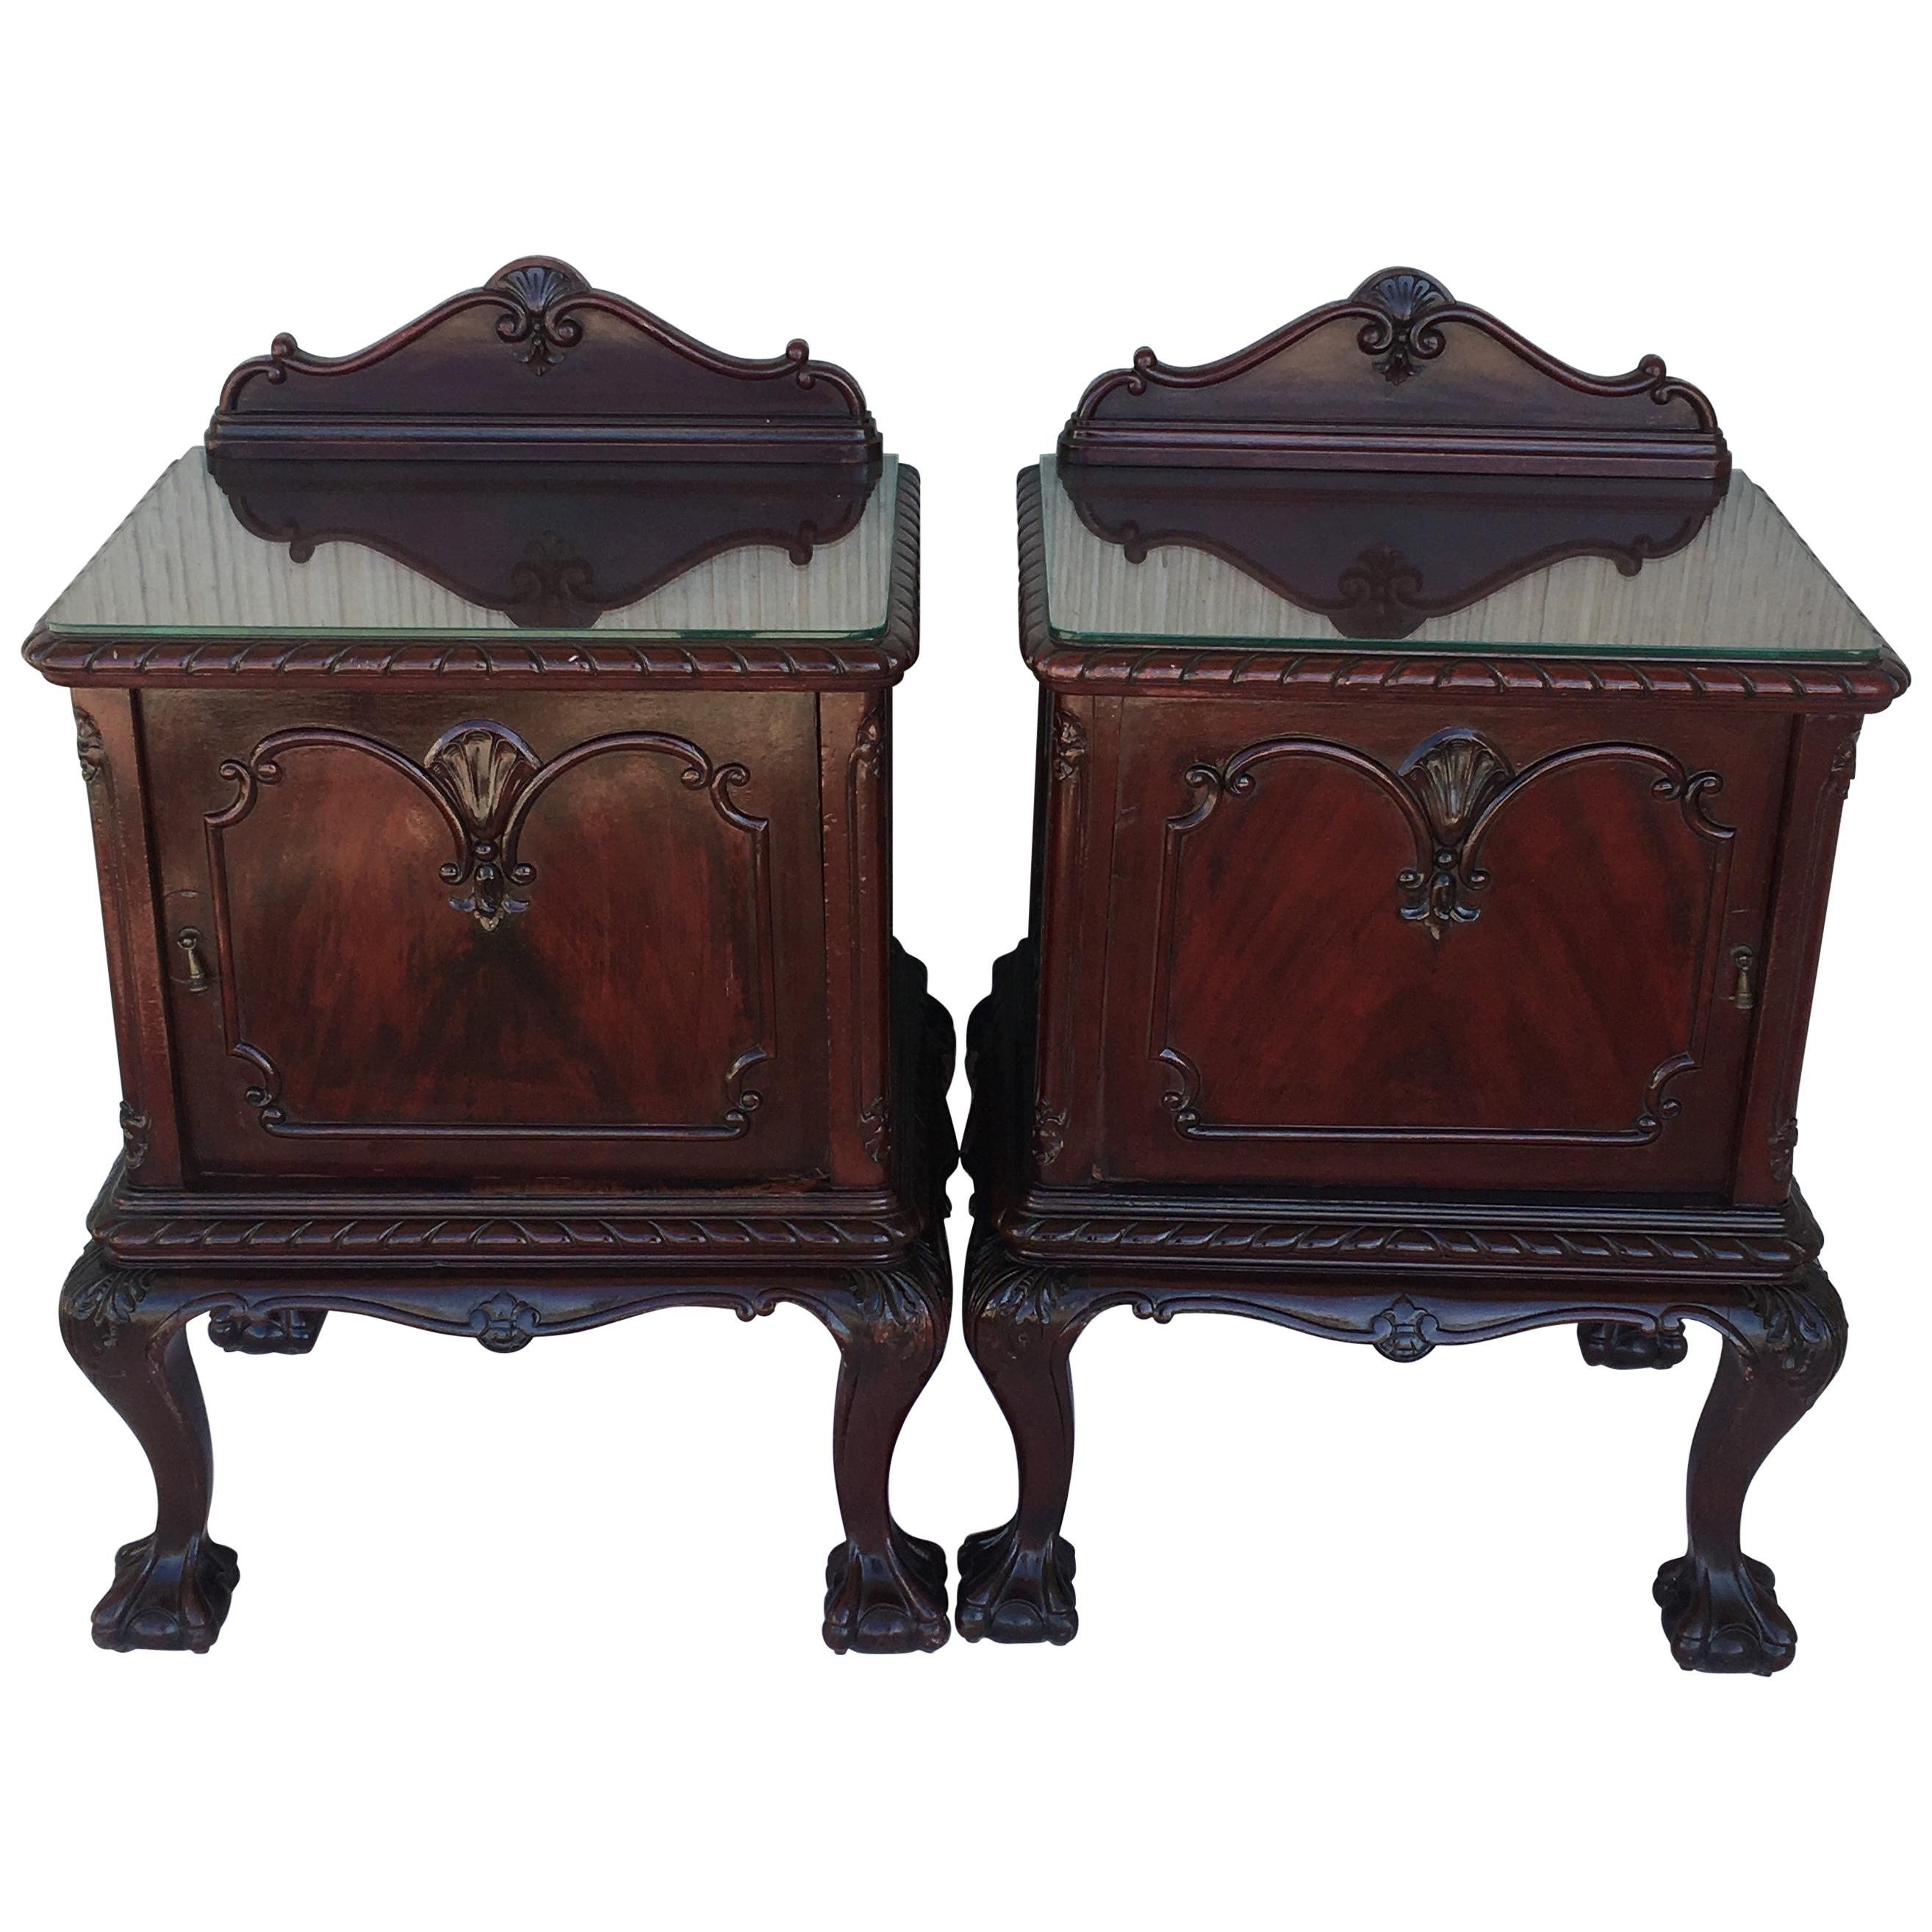 George III Period Walnut Nightstands or Bedsides with Glass Top and Door